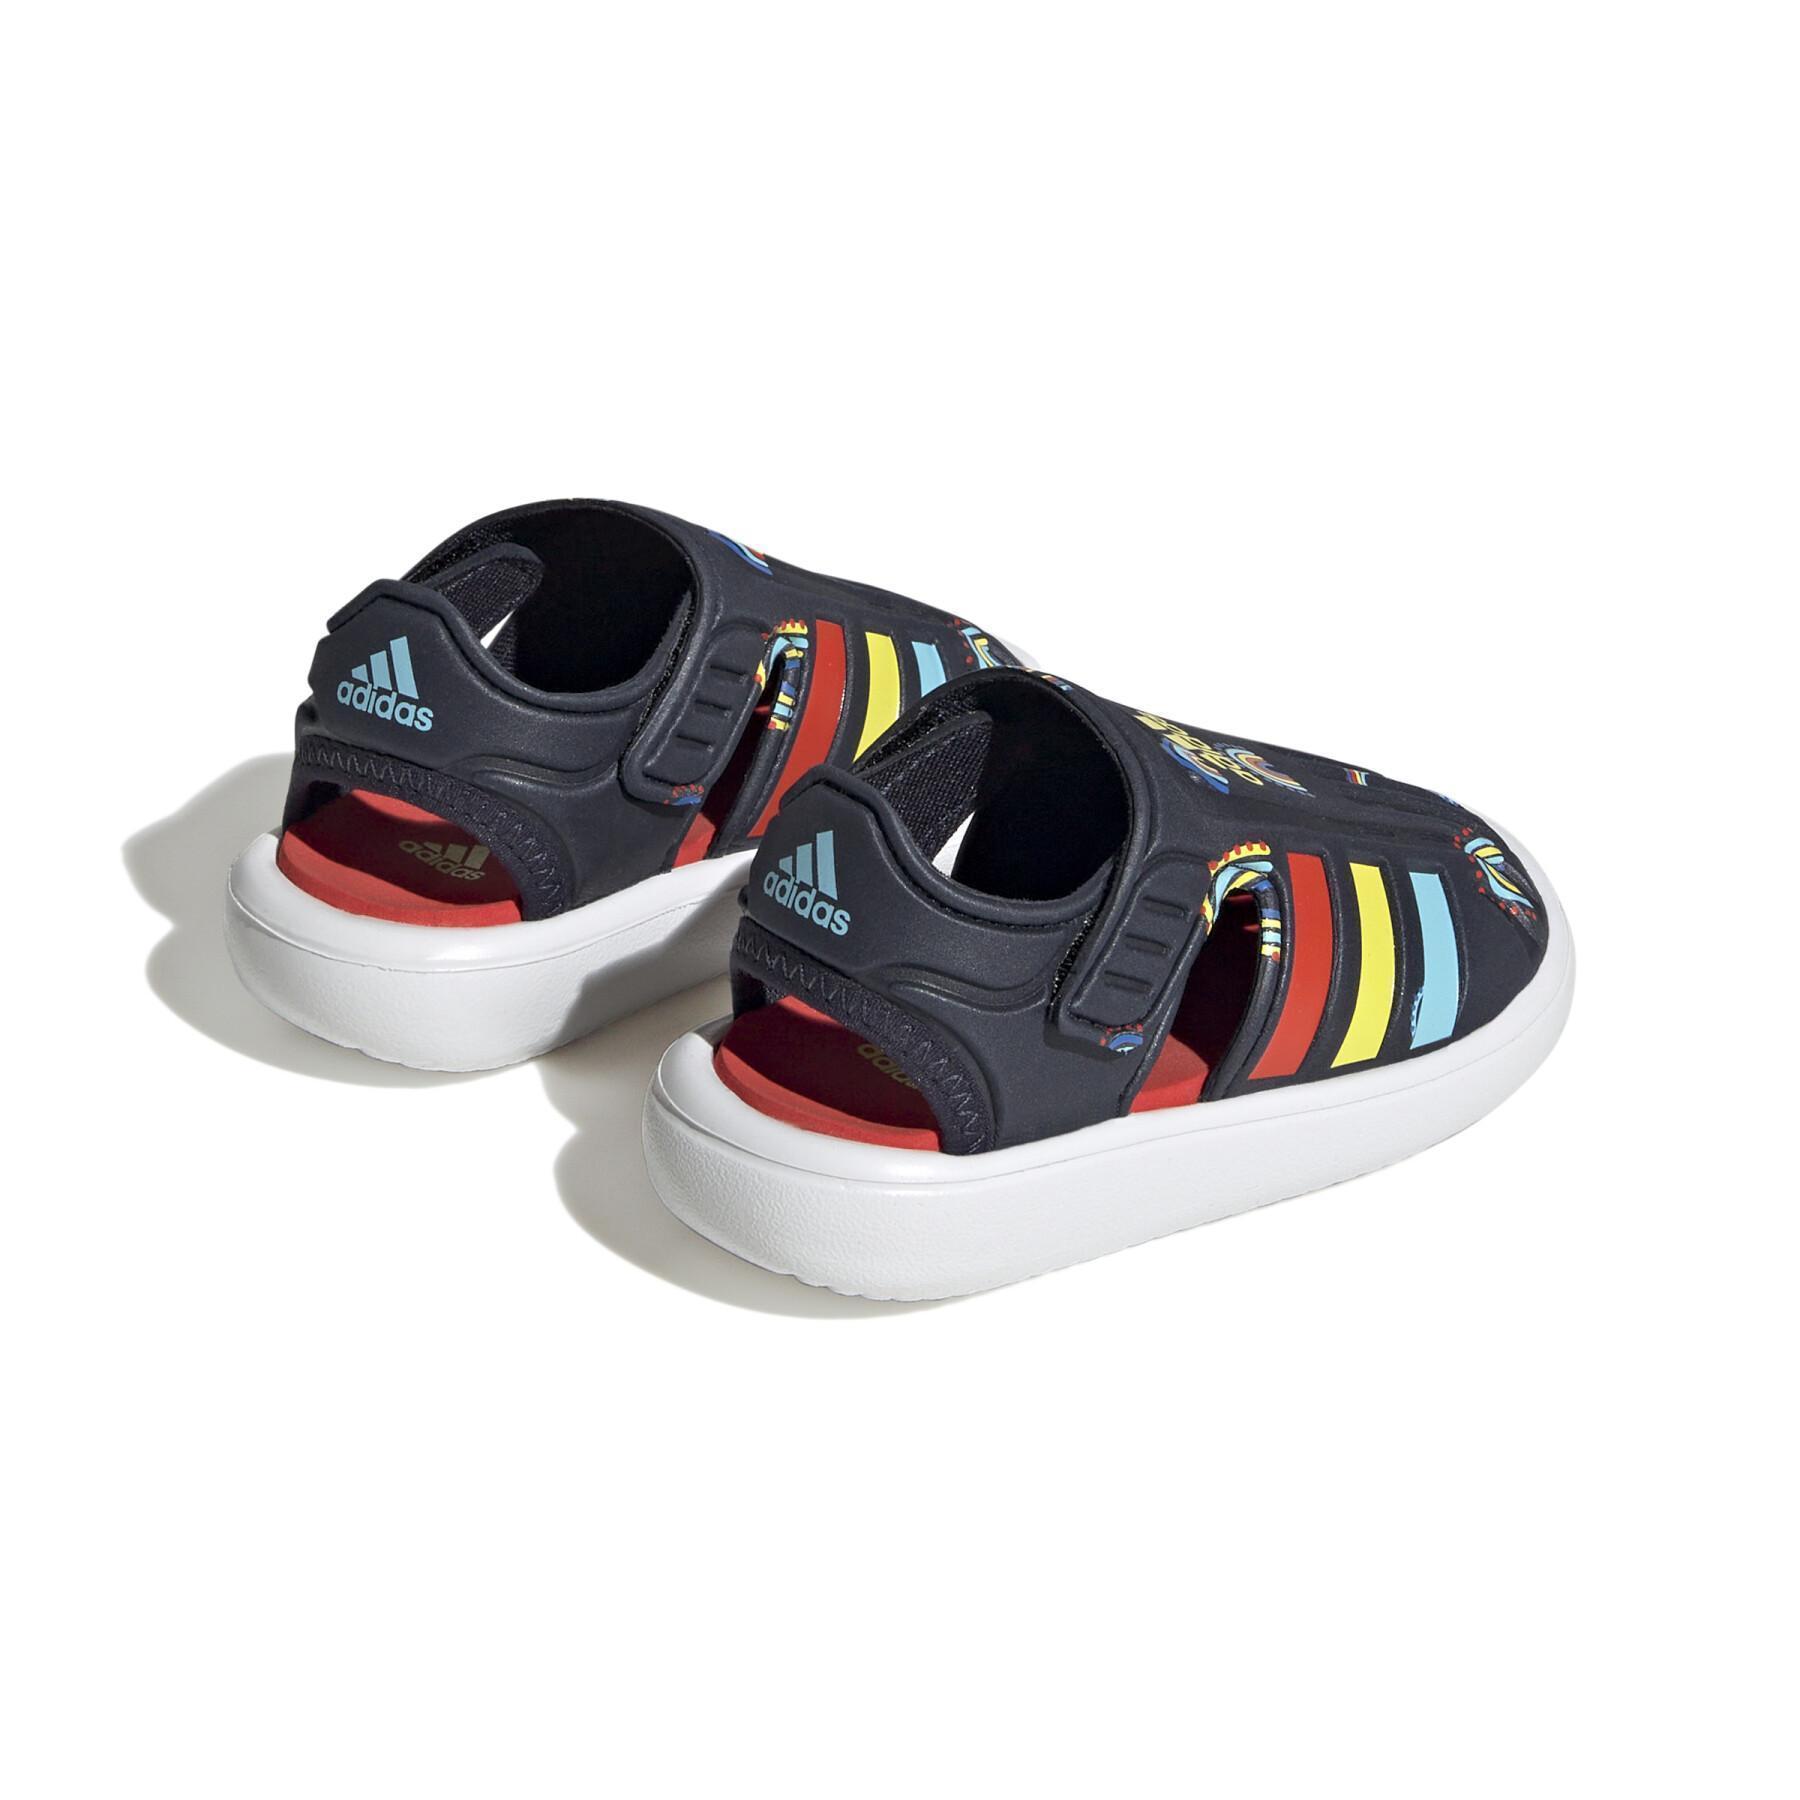 Summer sandals closed toe baby adidas - adidas - Brands - Lifestyle